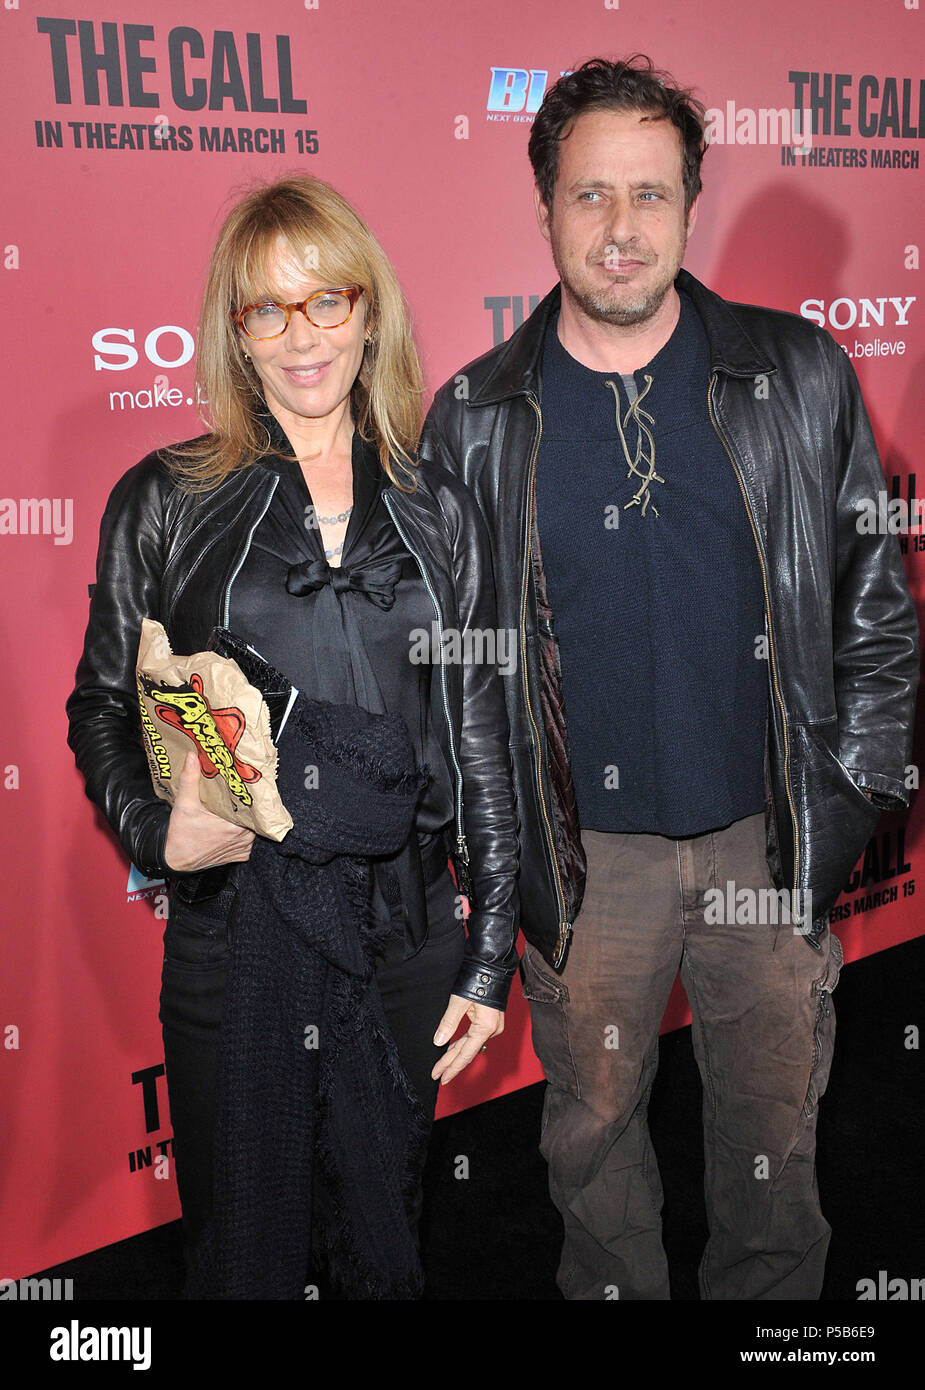 Rosanna Arquette and friend at The Call Premiere at the Arclight Theatre In Los Angeles.Rosanna Arquette and friend ------------- Red Carpet Event, Vertical, USA, Film Industry, Celebrities,  Photography, Bestof, Arts Culture and Entertainment, Topix Celebrities fashion /  Vertical, Best of, Event in Hollywood Life - California,  Red Carpet and backstage, USA, Film Industry, Celebrities,  movie celebrities, TV celebrities, Music celebrities, Photography, Bestof, Arts Culture and Entertainment,  Topix, vertical,  family from from the year , 2013, inquiry tsuni@Gamma-USA.com Husband and wife Stock Photo